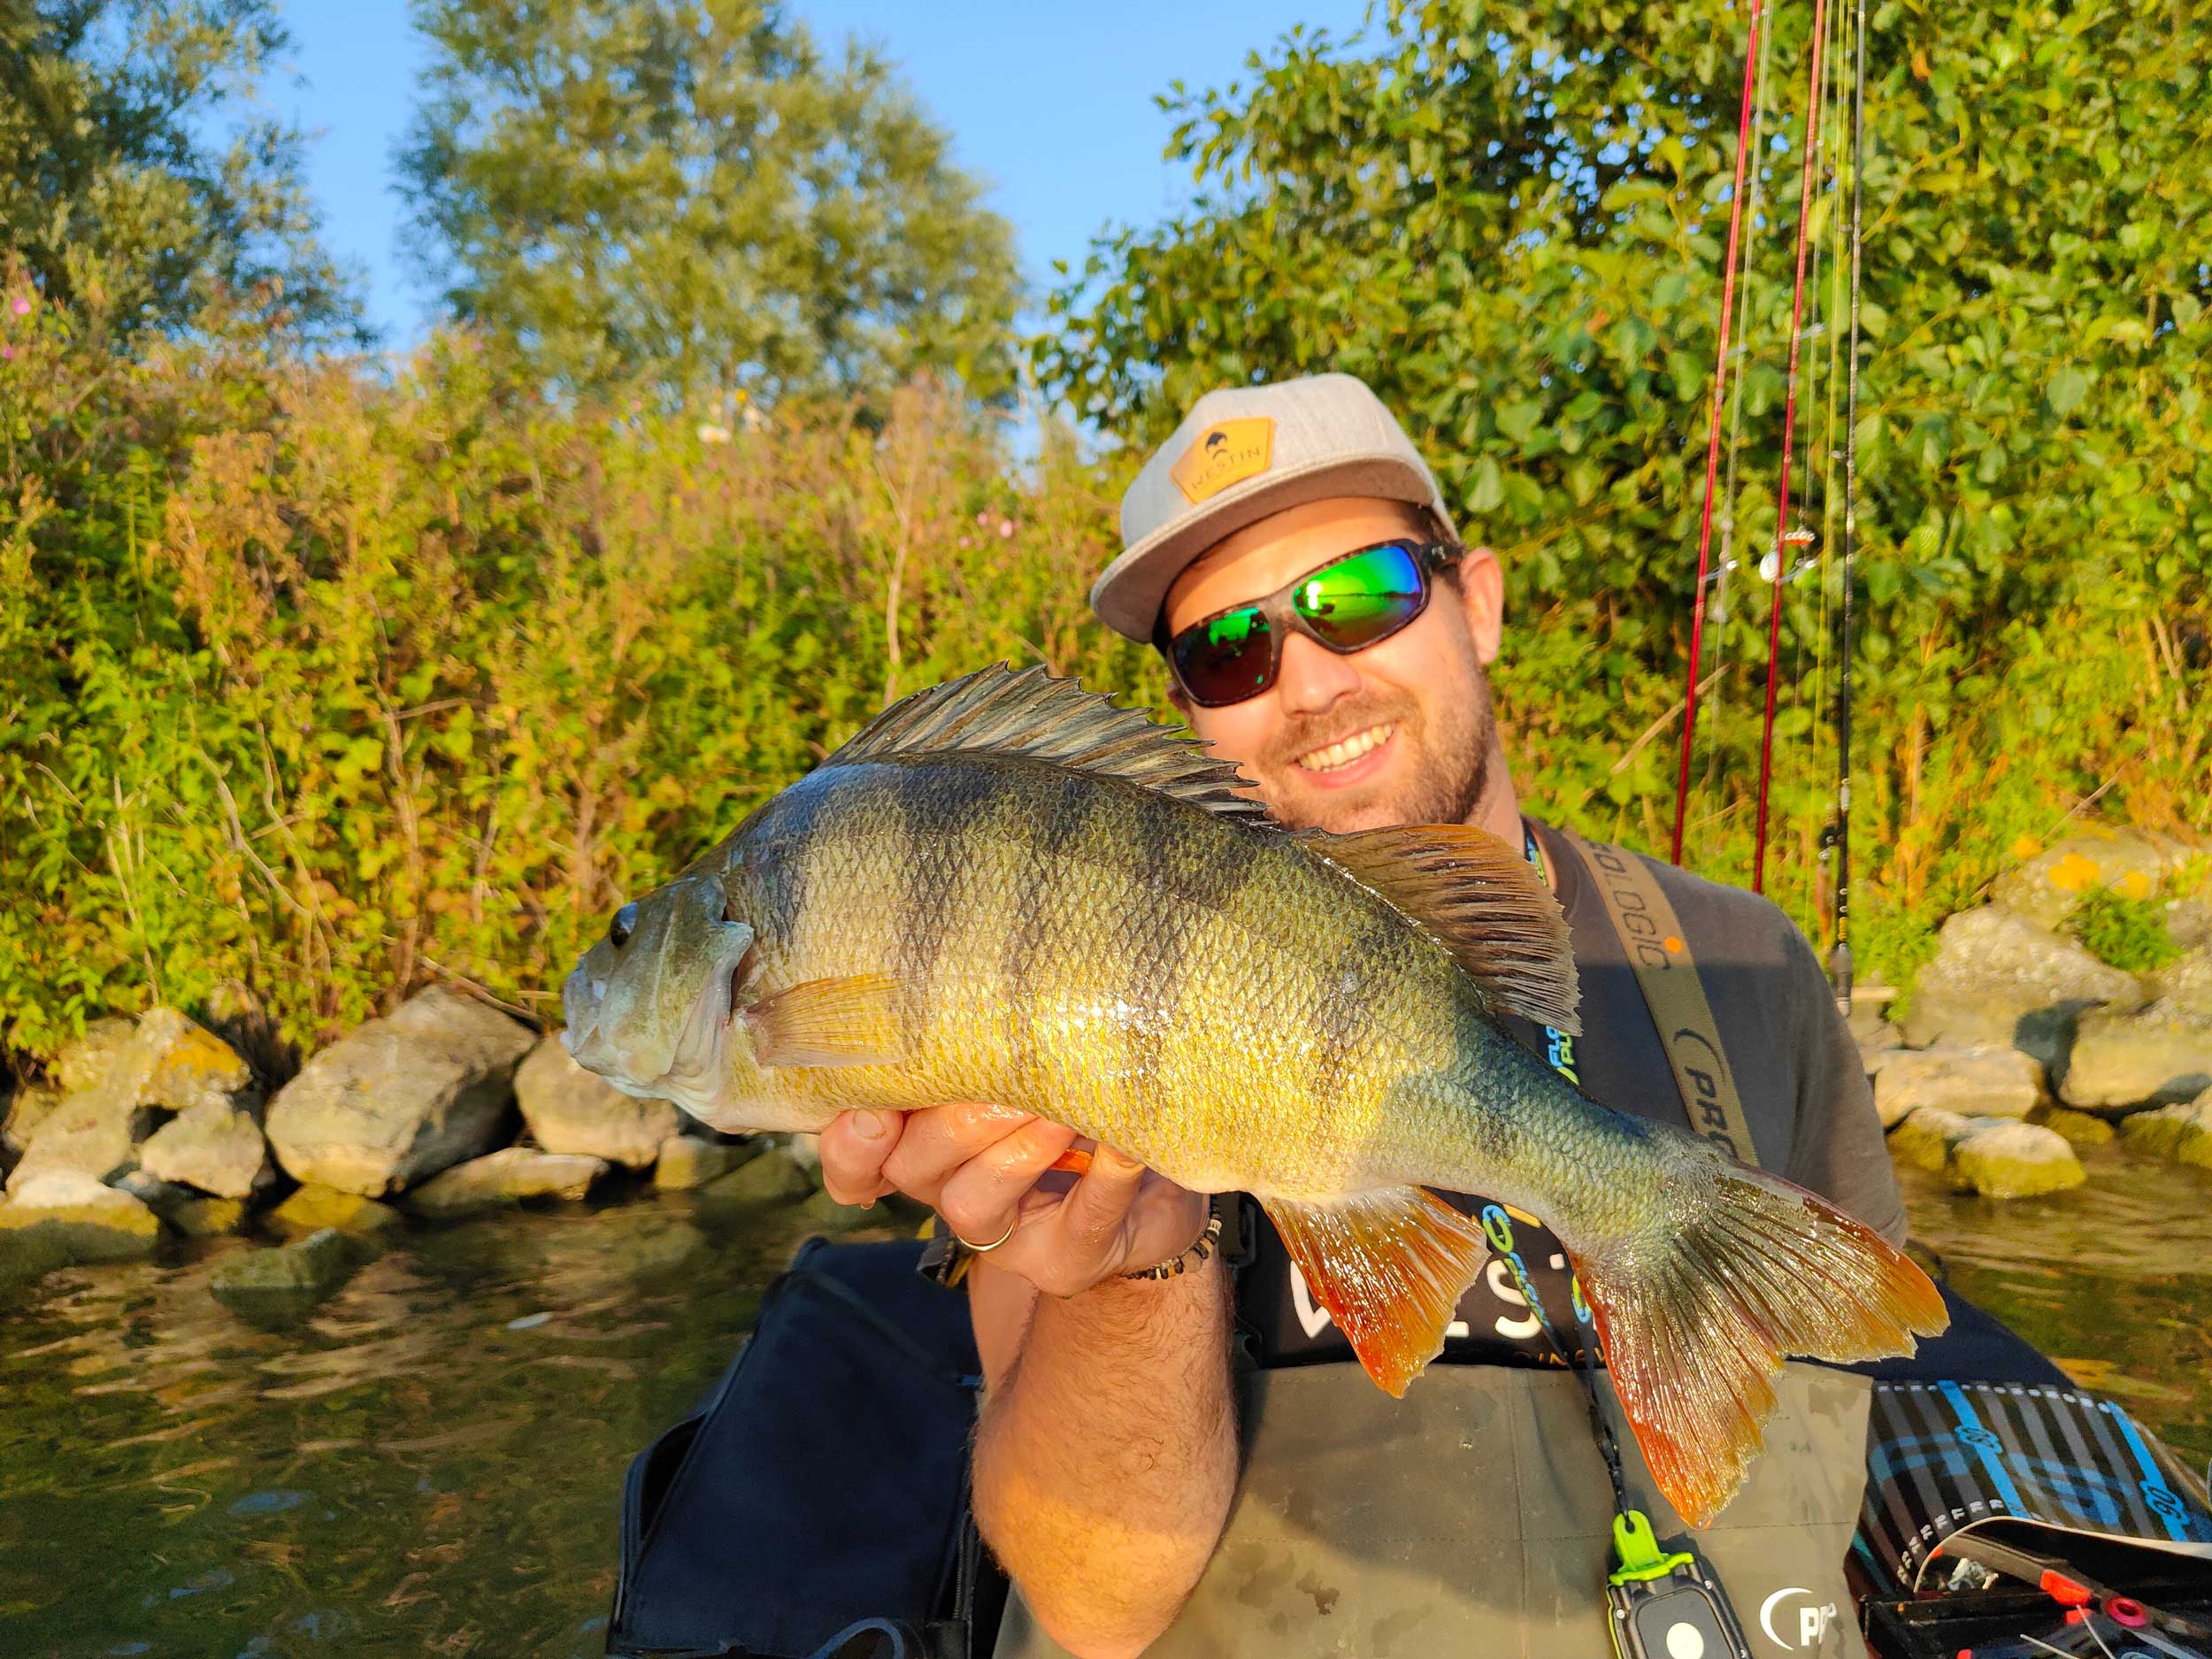 Top 5 tips for selecting the best freshwater fishing sunglasses - LiP  Watersports Sunglasses